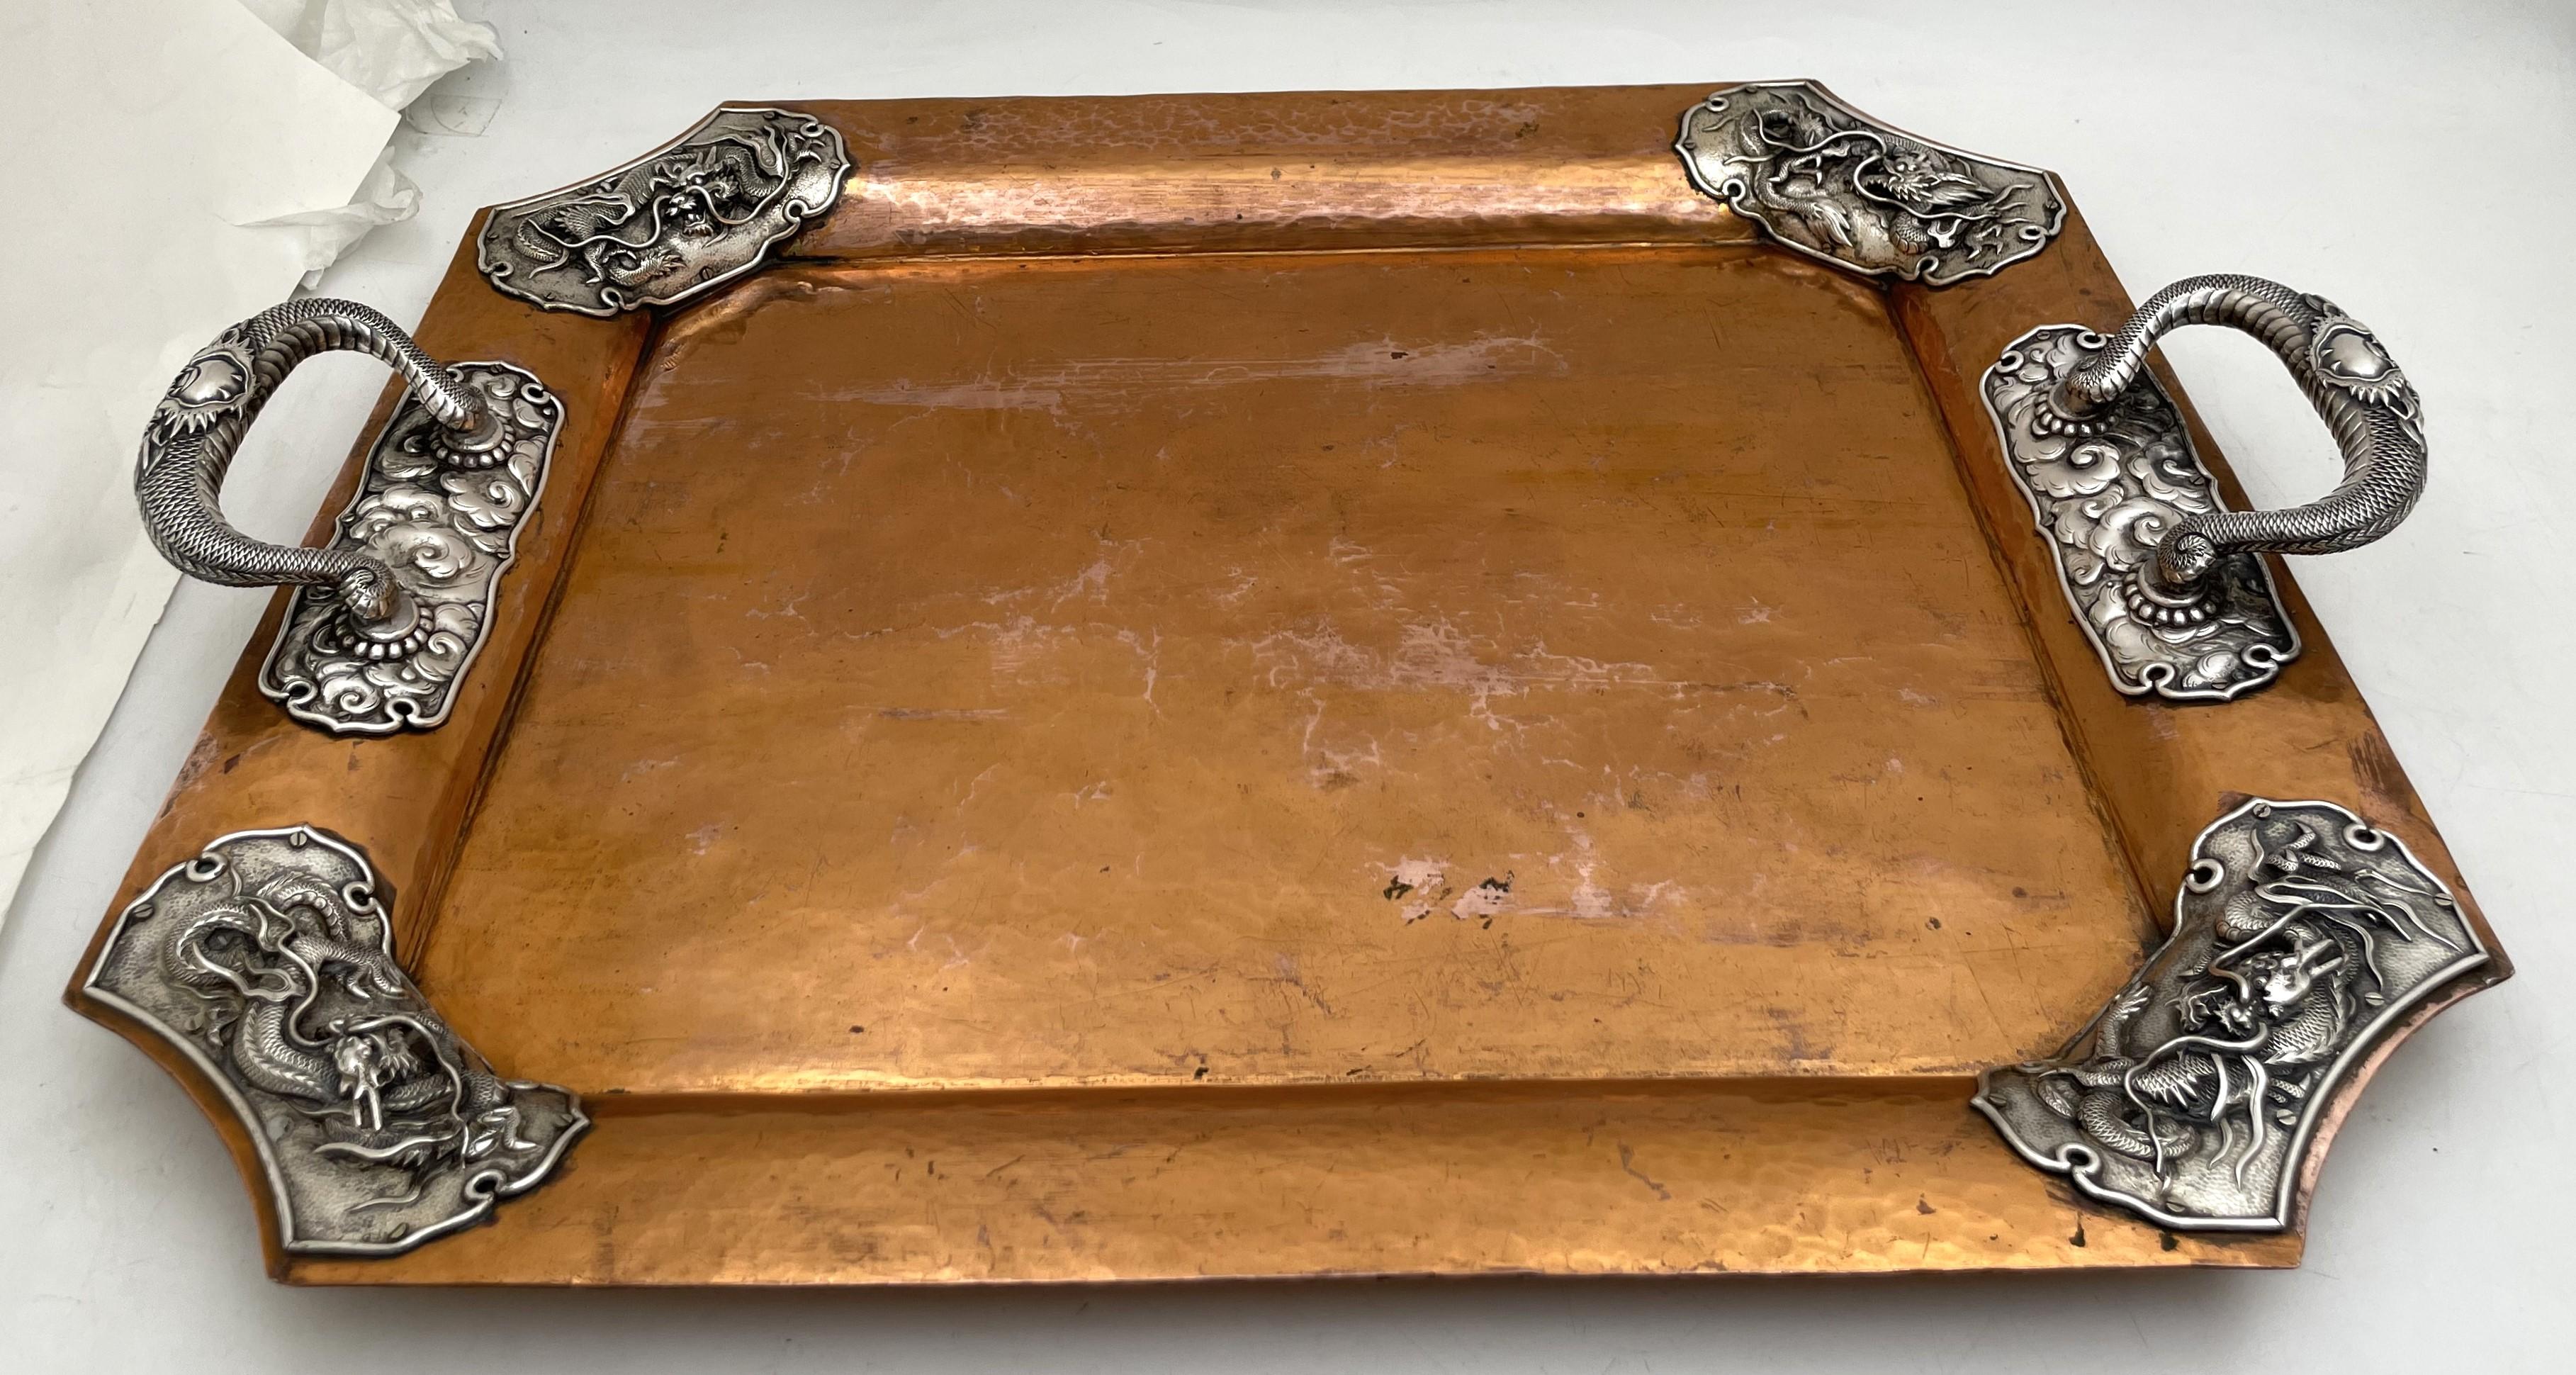 Japanese mixed metal copper and silver two-handled tray, from the late 19th or early 20th century, beautifully adorned with dragon motifs in relief on the rim and handles. It measures 20 1/2'' from handle to handle (inner length is 18 1/2'') by 16''